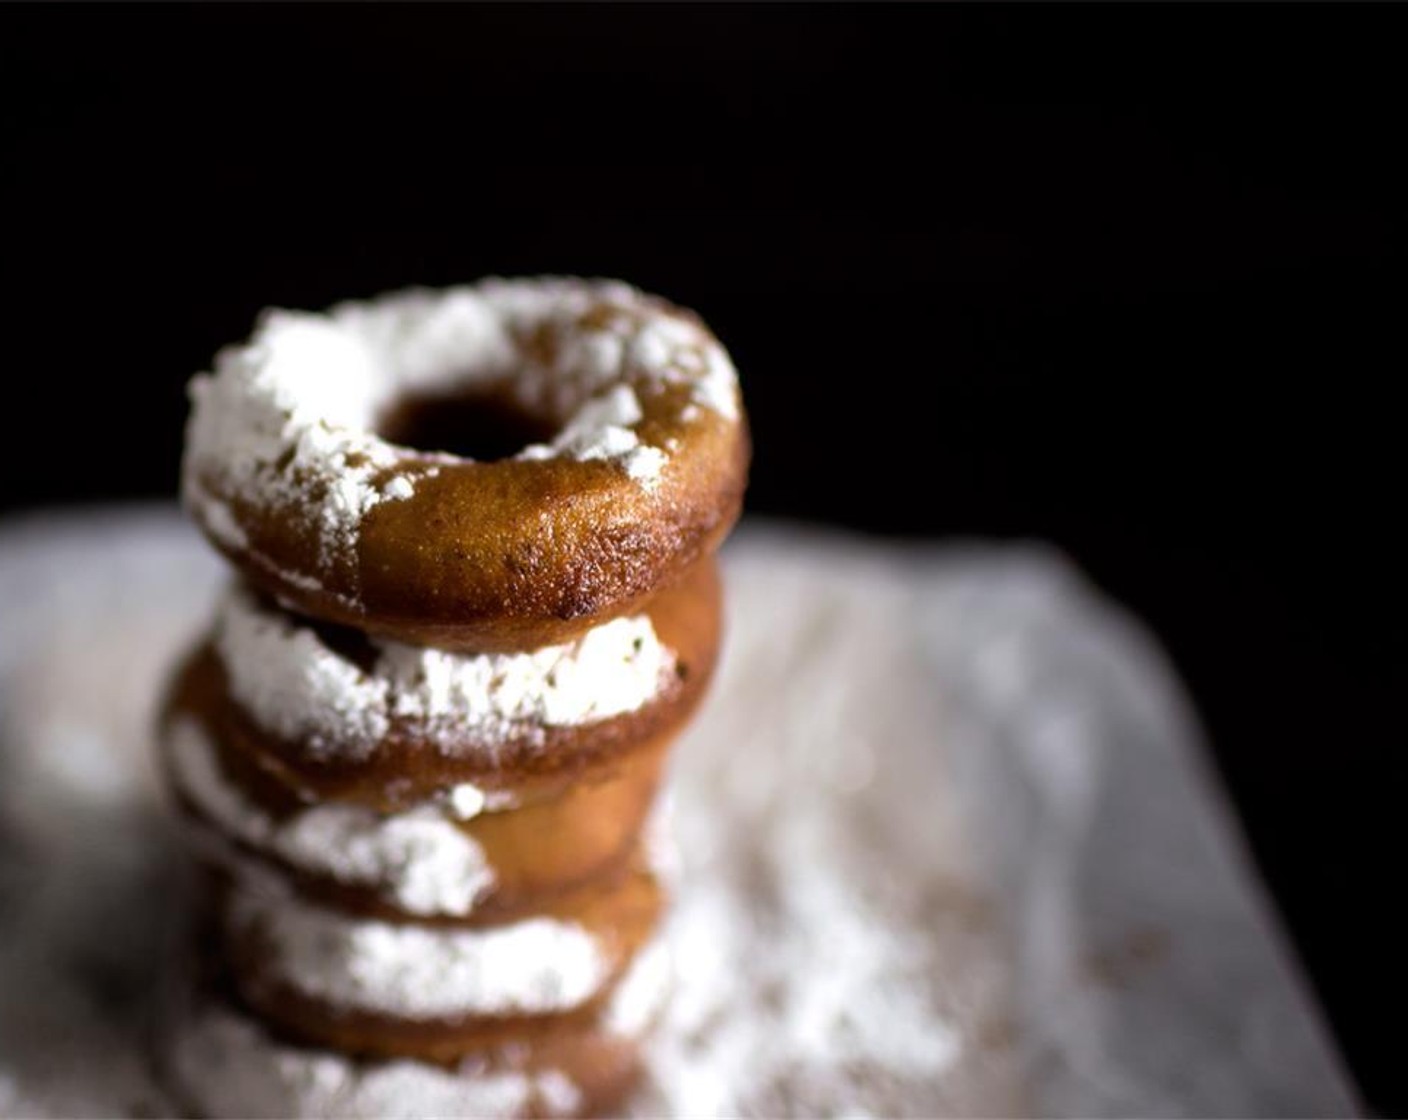 step 11 To serve, mix Powdered Confectioners Sugar (1/2 cup) together with Ground Allspice (1 tsp) and spoon generously over the warm donuts.